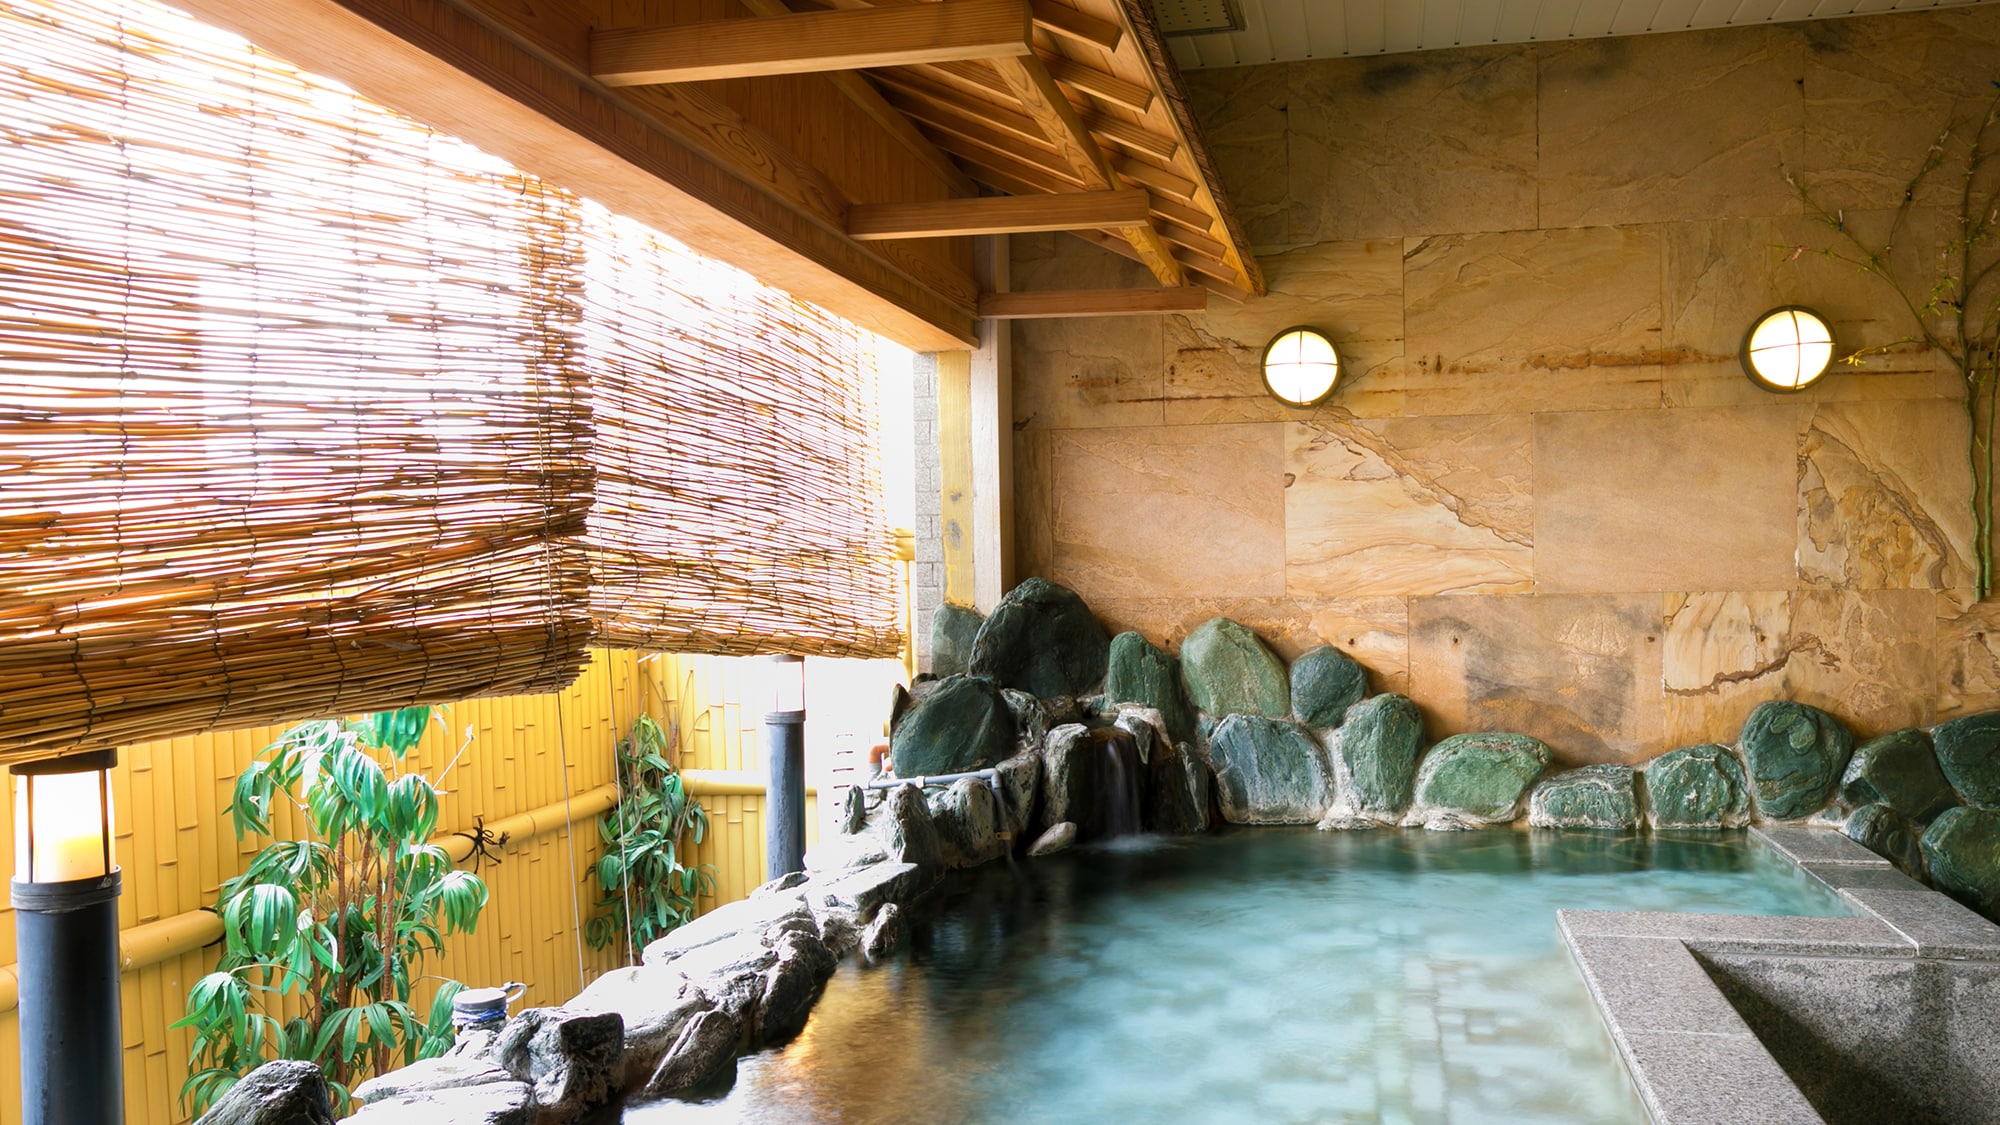 ■ Large communal bath (women's bath) ■ Relax your legs and hands ♪